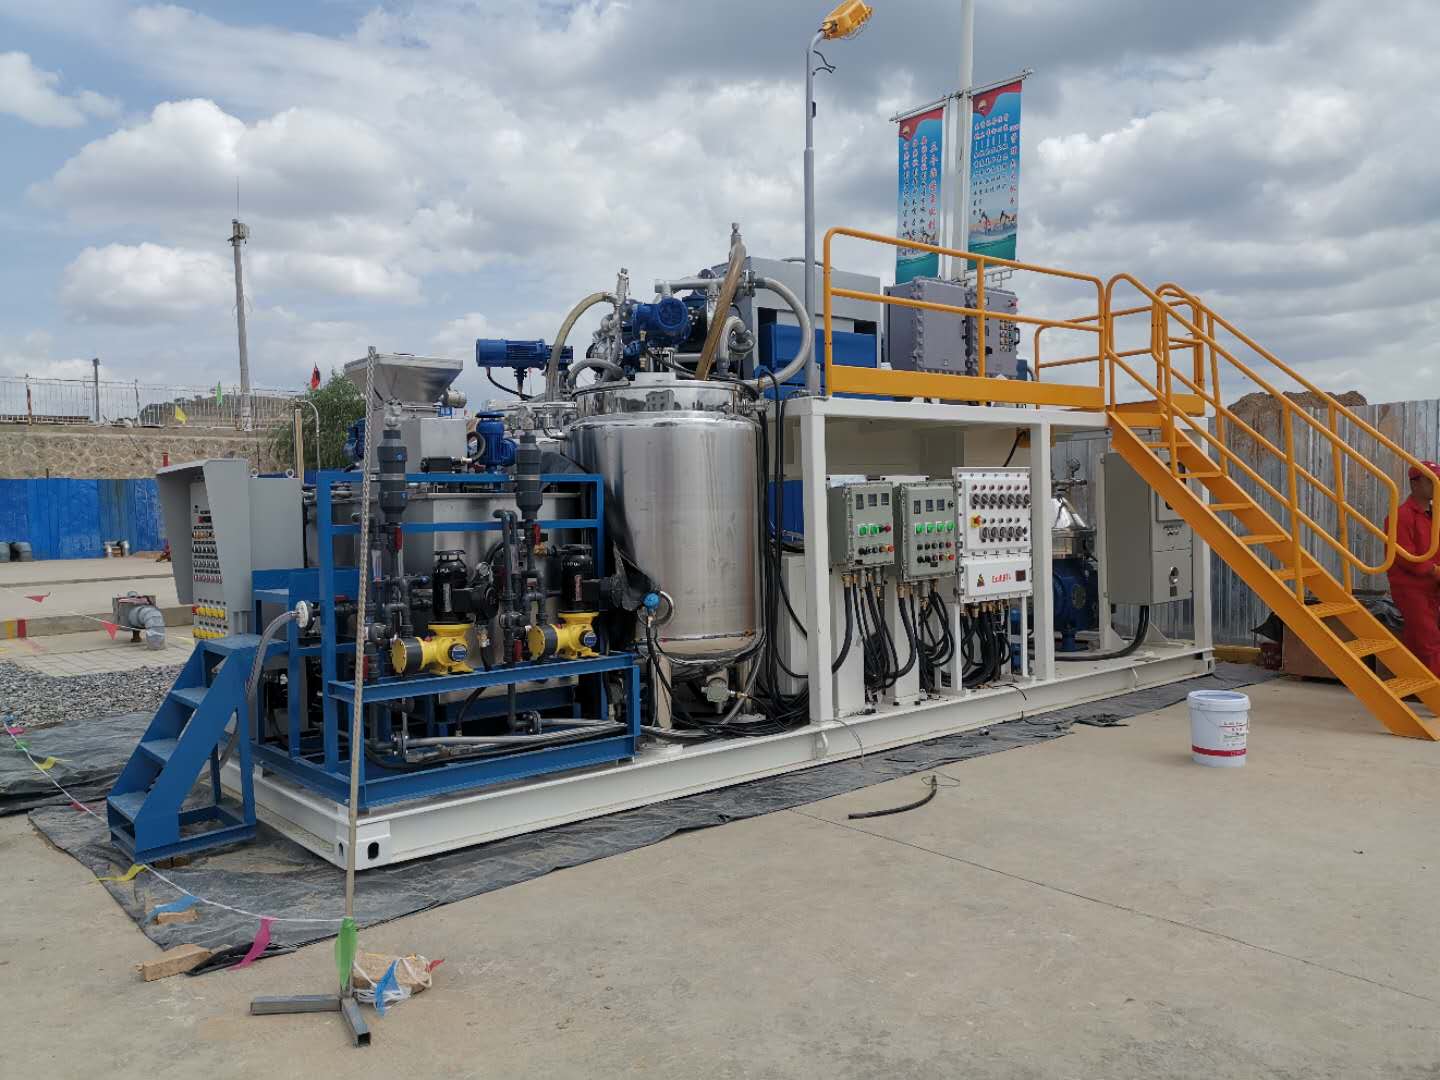 BZ Oil Sludge Treatment System was highly praised by customers